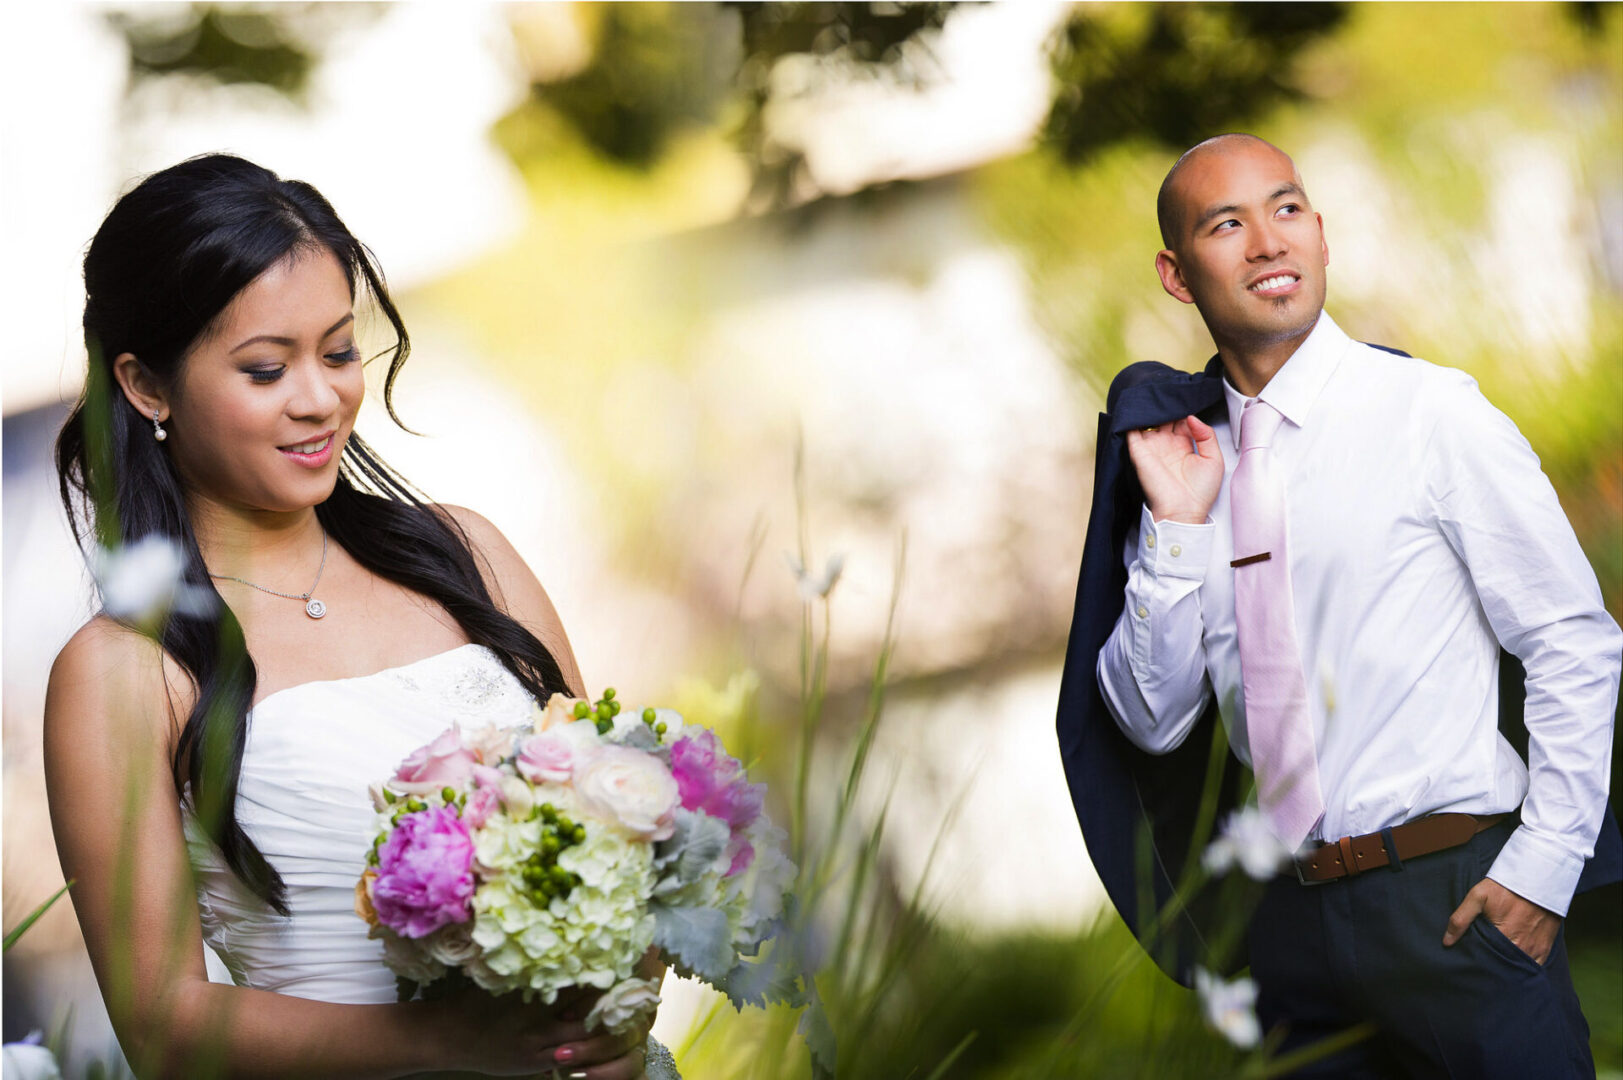 A bride holding flowers in hand with groom